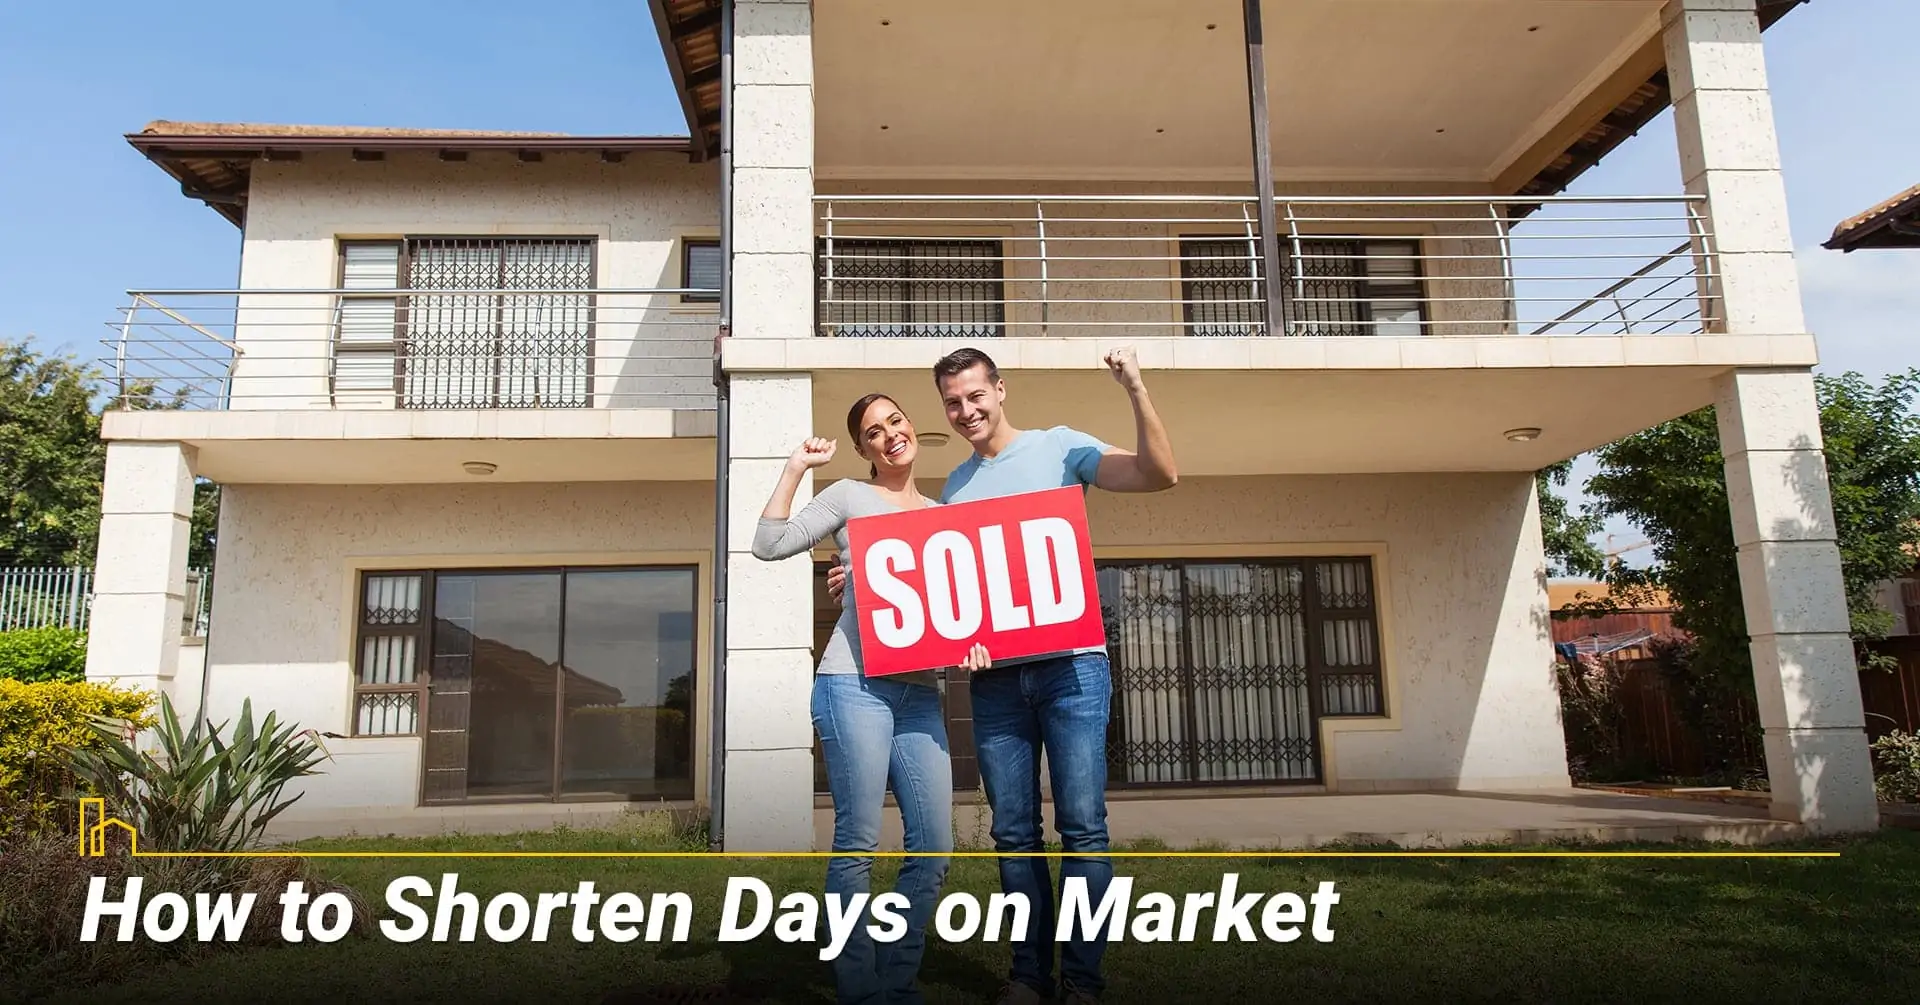 How to Shorten Days on Market. Ways to speed up the selling process